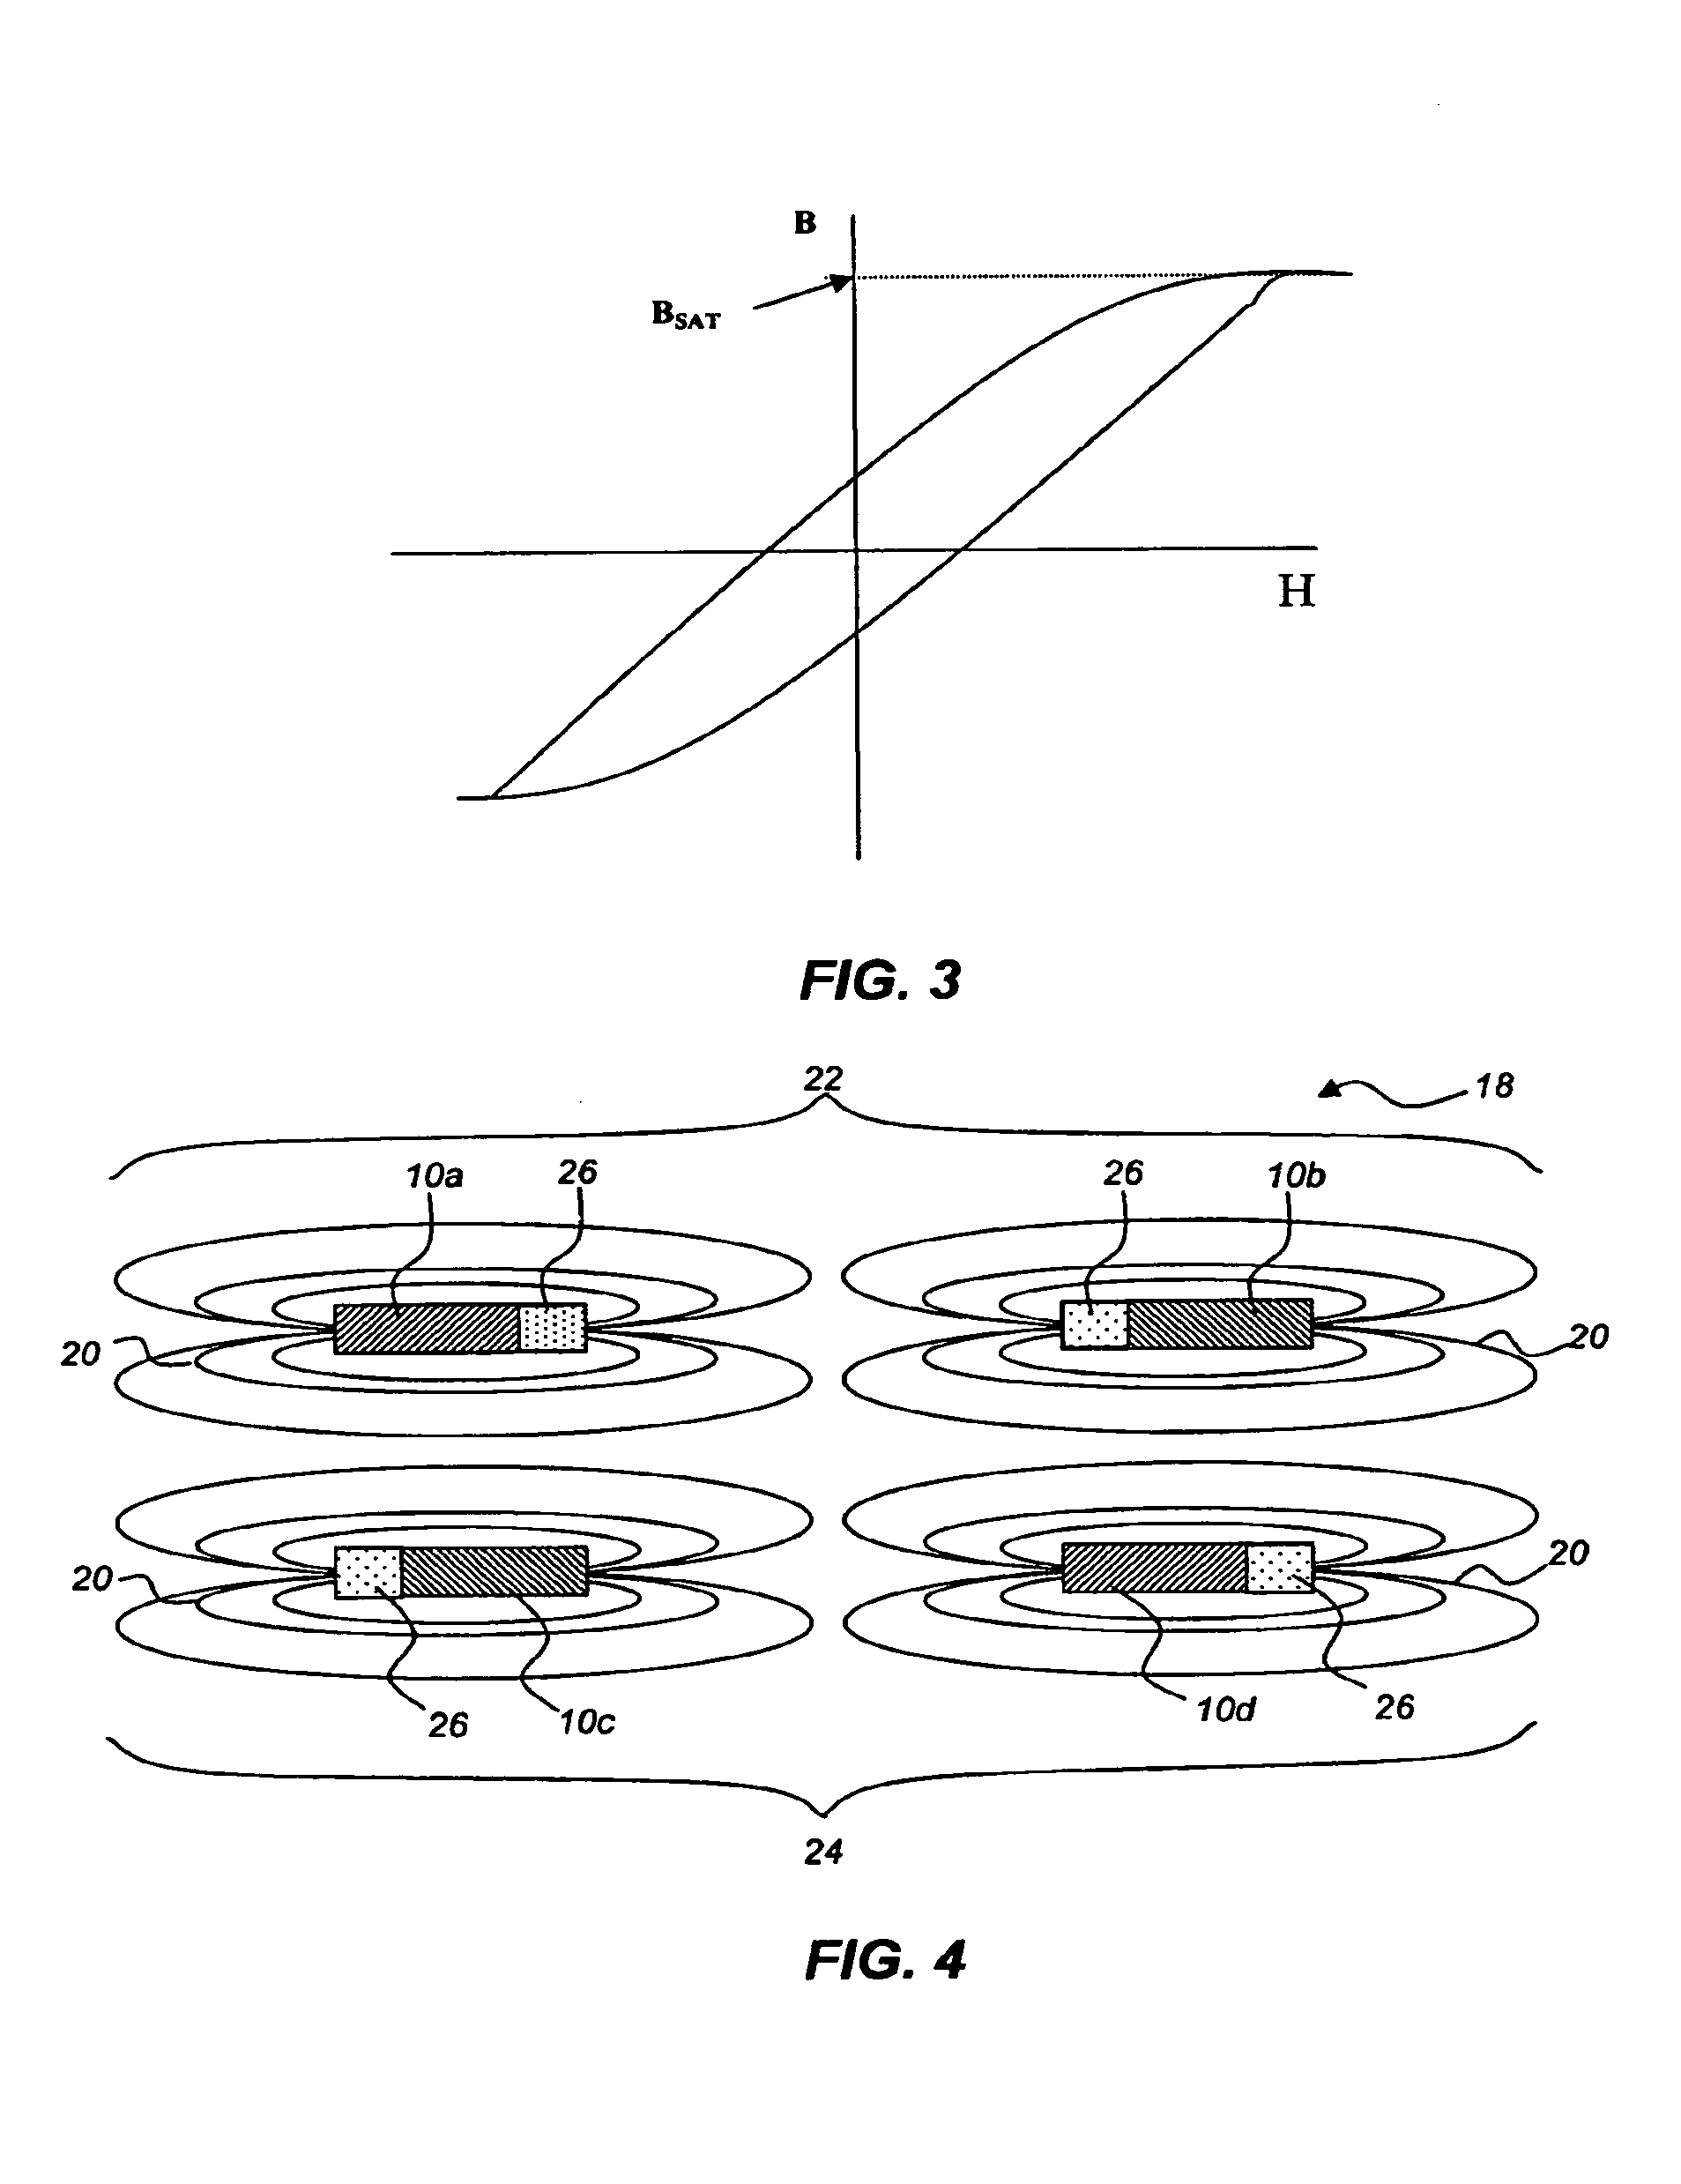 High field strength magentic field generation system and associated methods